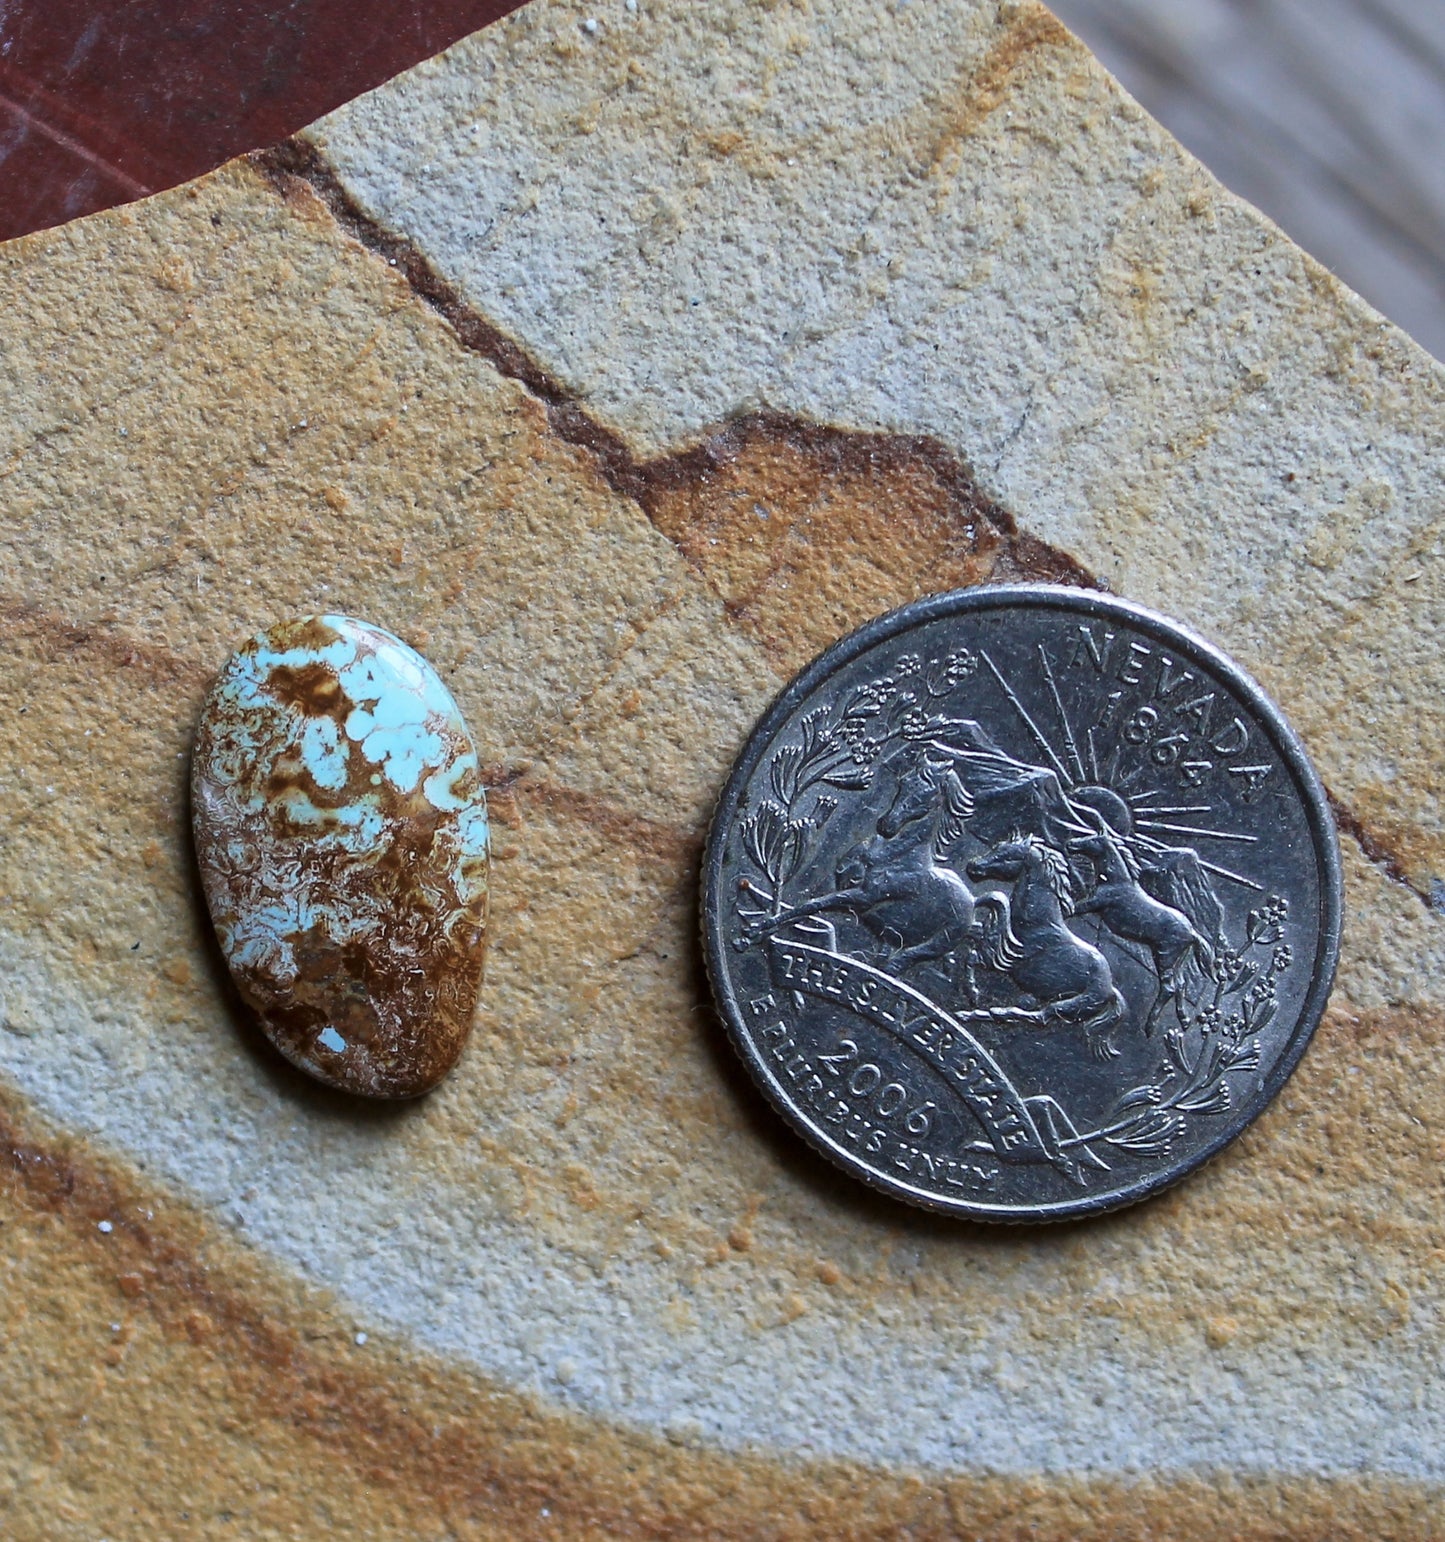 4 carat light blue Stone Mountain Turquoise cabochon with red inclusions